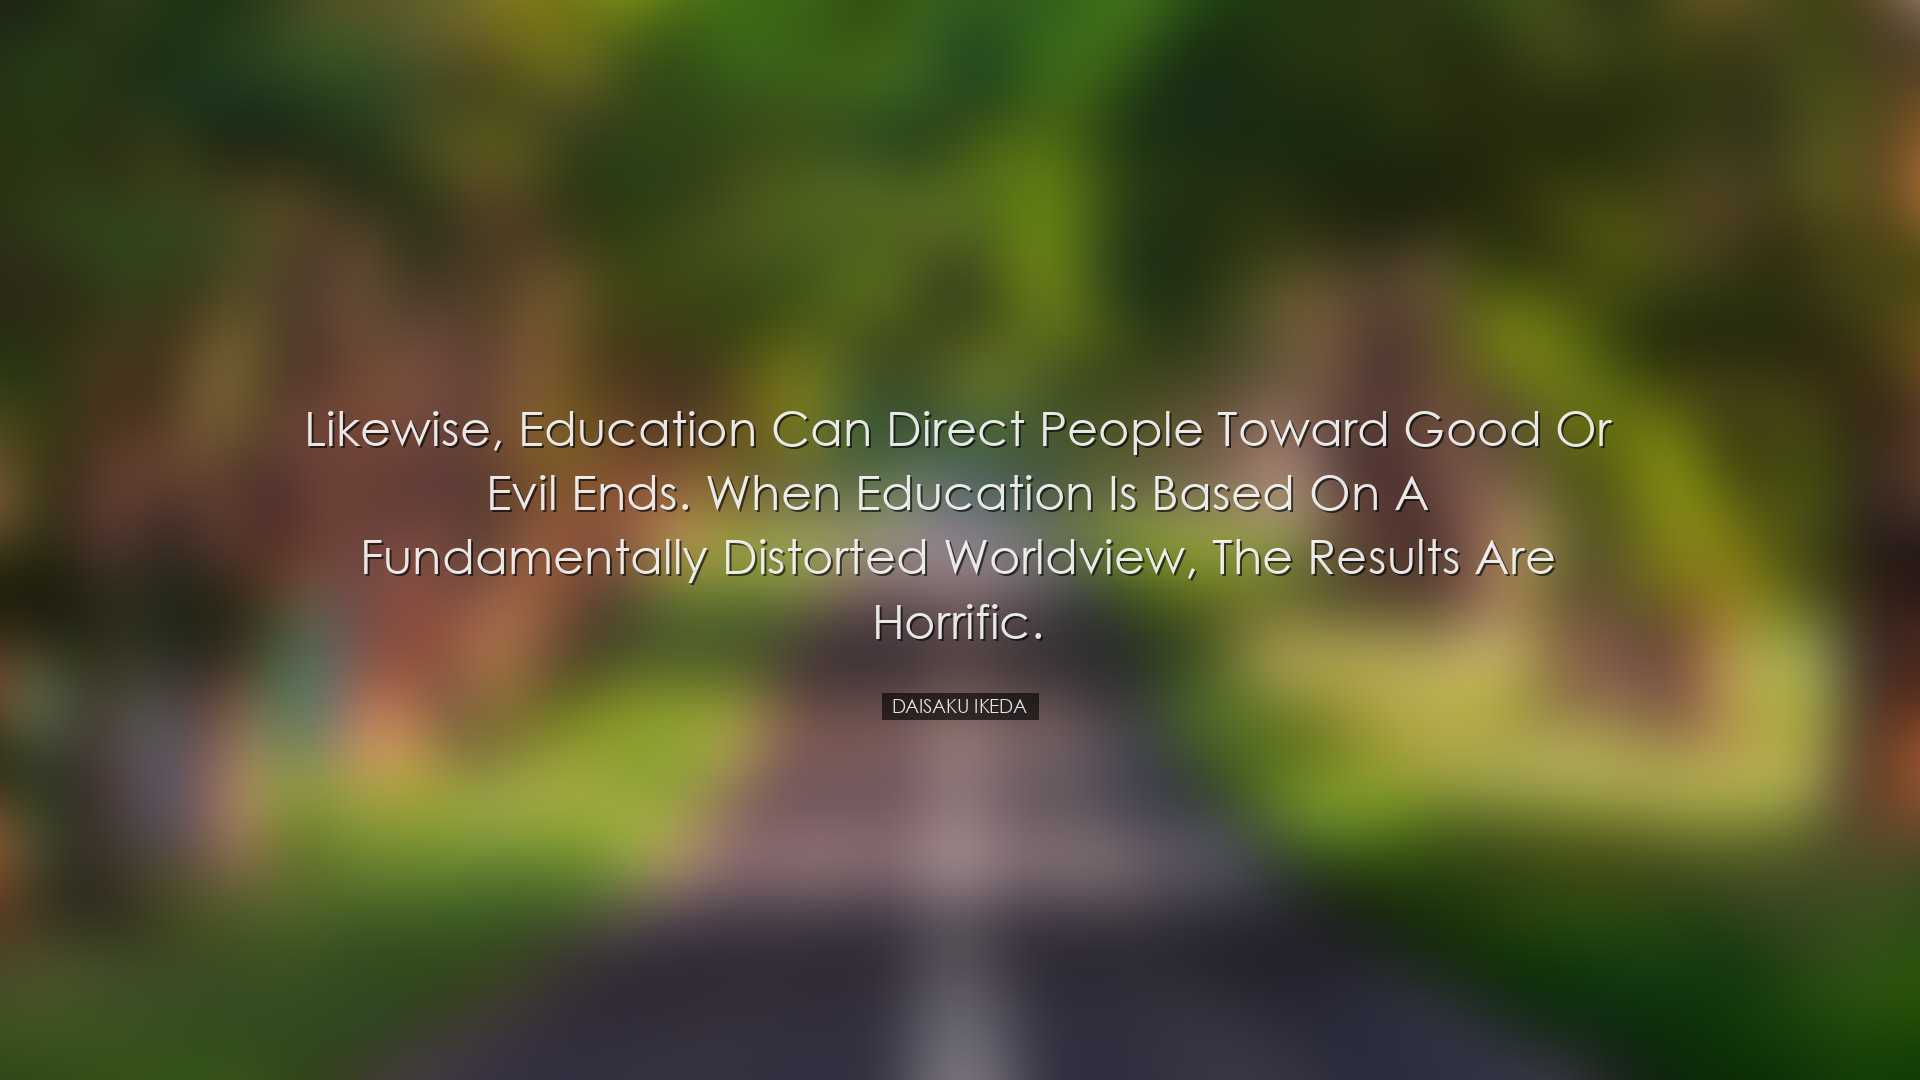 Likewise, education can direct people toward good or evil ends. Wh